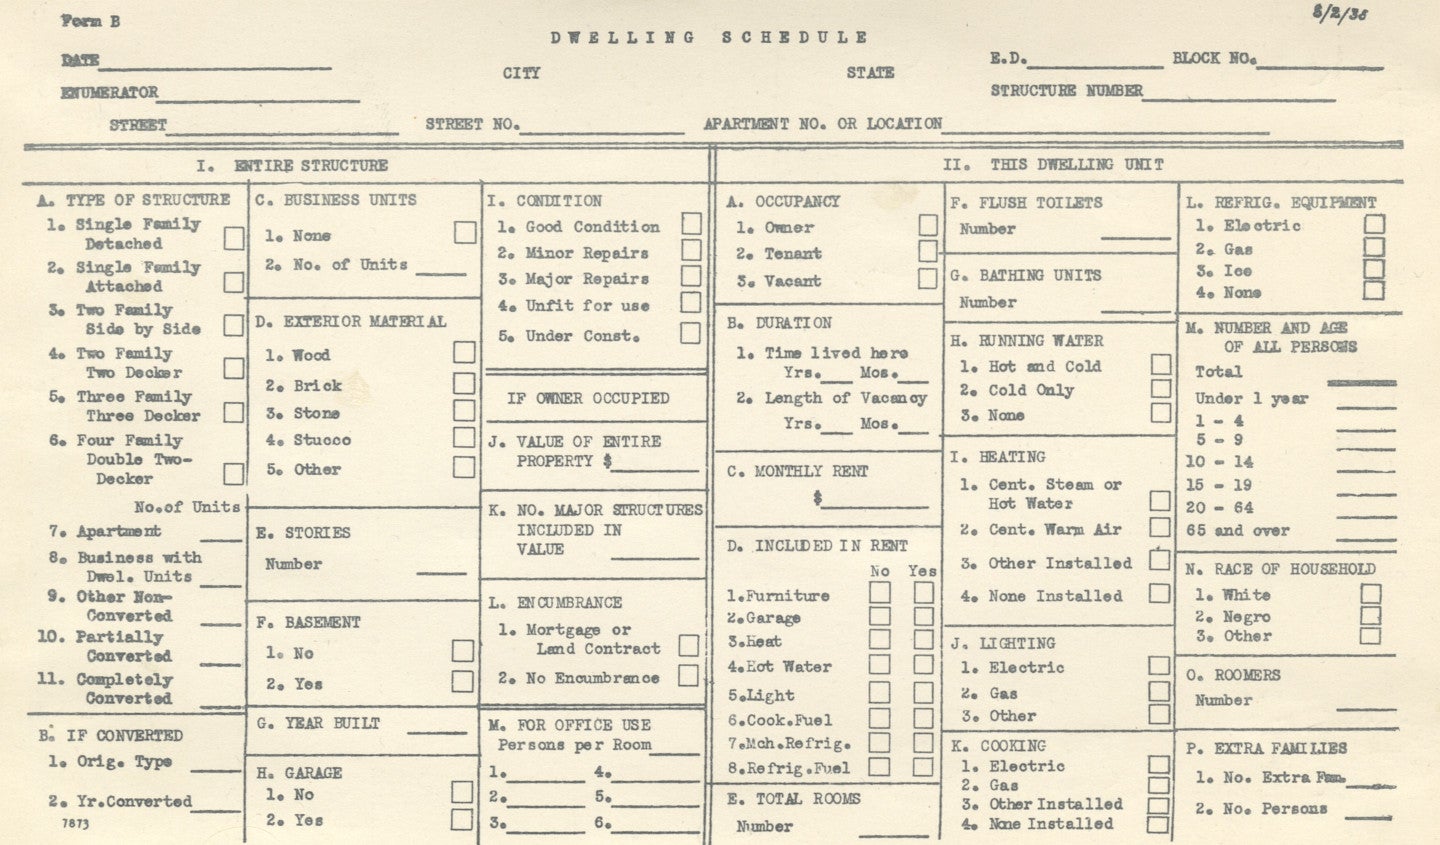 "Dwelling Schedule" from 1935 TRPS from FHA/WPA